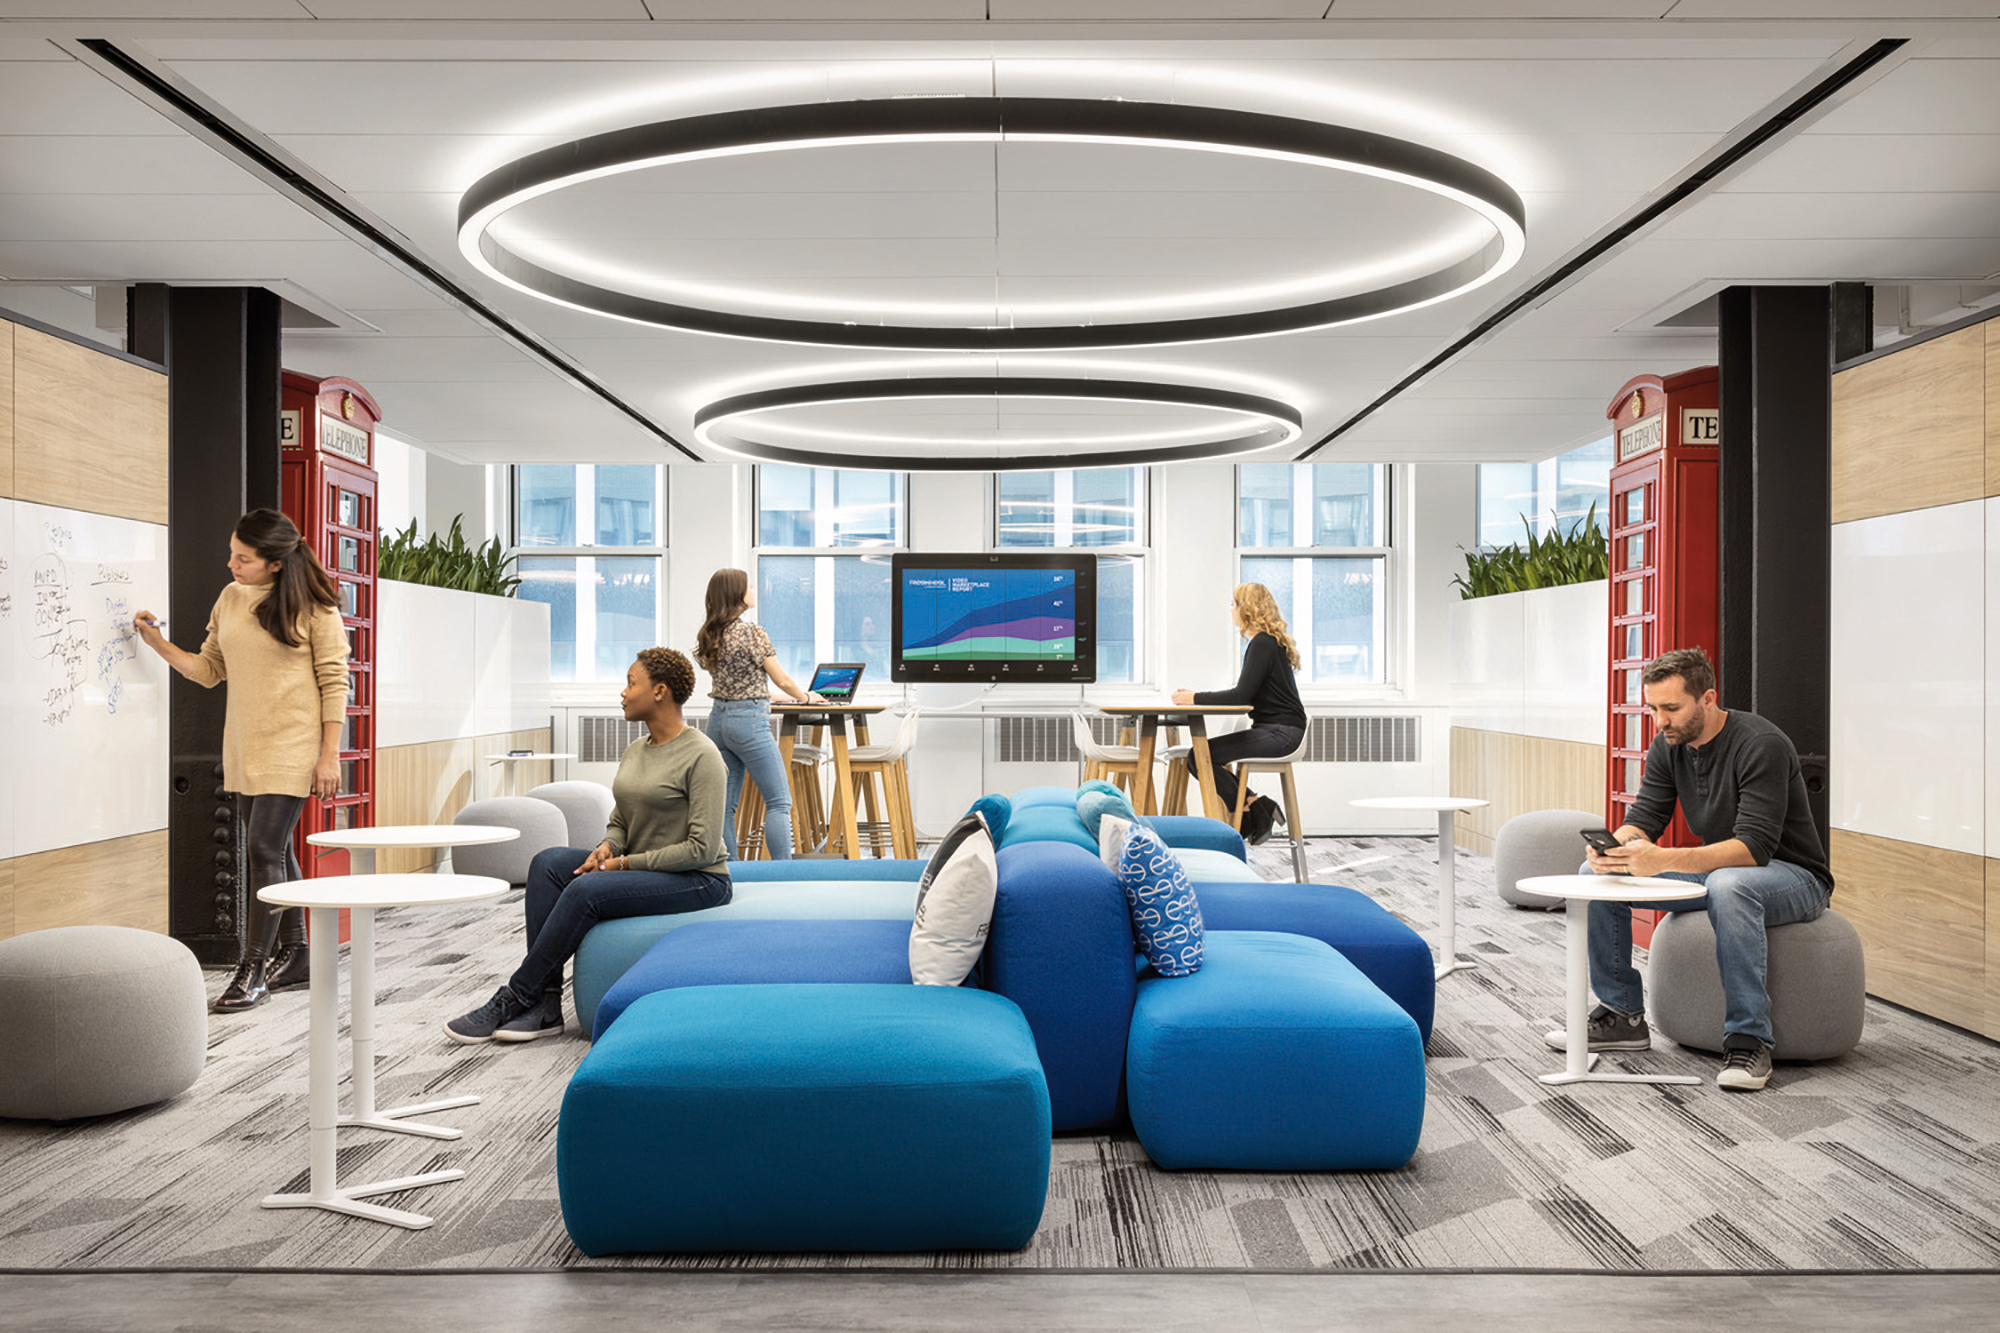 Modern office space featuring an eclectic mix of seating, including bean bags and high stools. An oval overhead lighting fixture mimics the shape of the central seating arrangement, while whiteboards and multimedia screens facilitate collaboration. The design integrates both privacy and openness, with ample natural light.